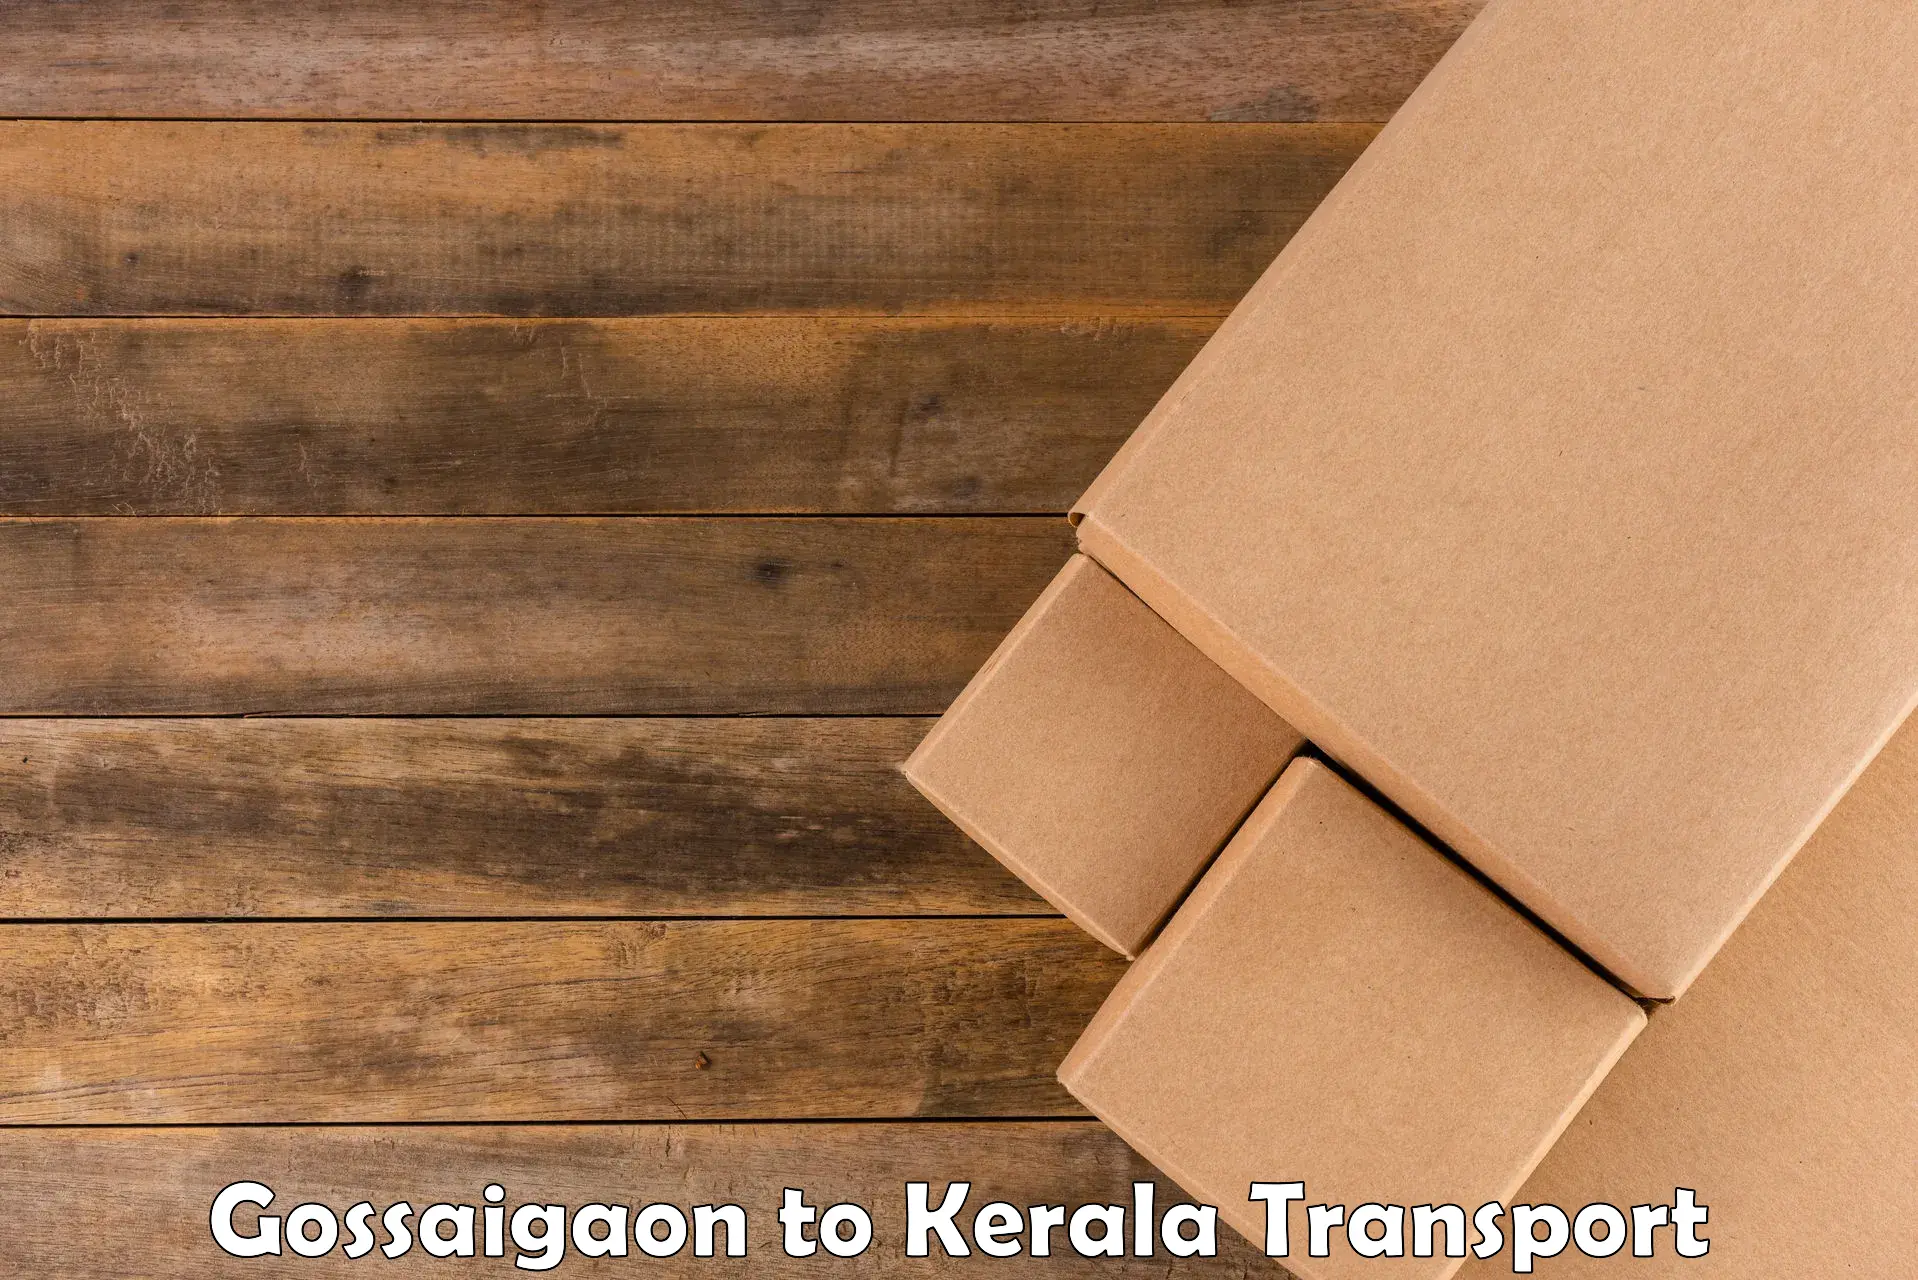 Truck transport companies in India Gossaigaon to Payyanur